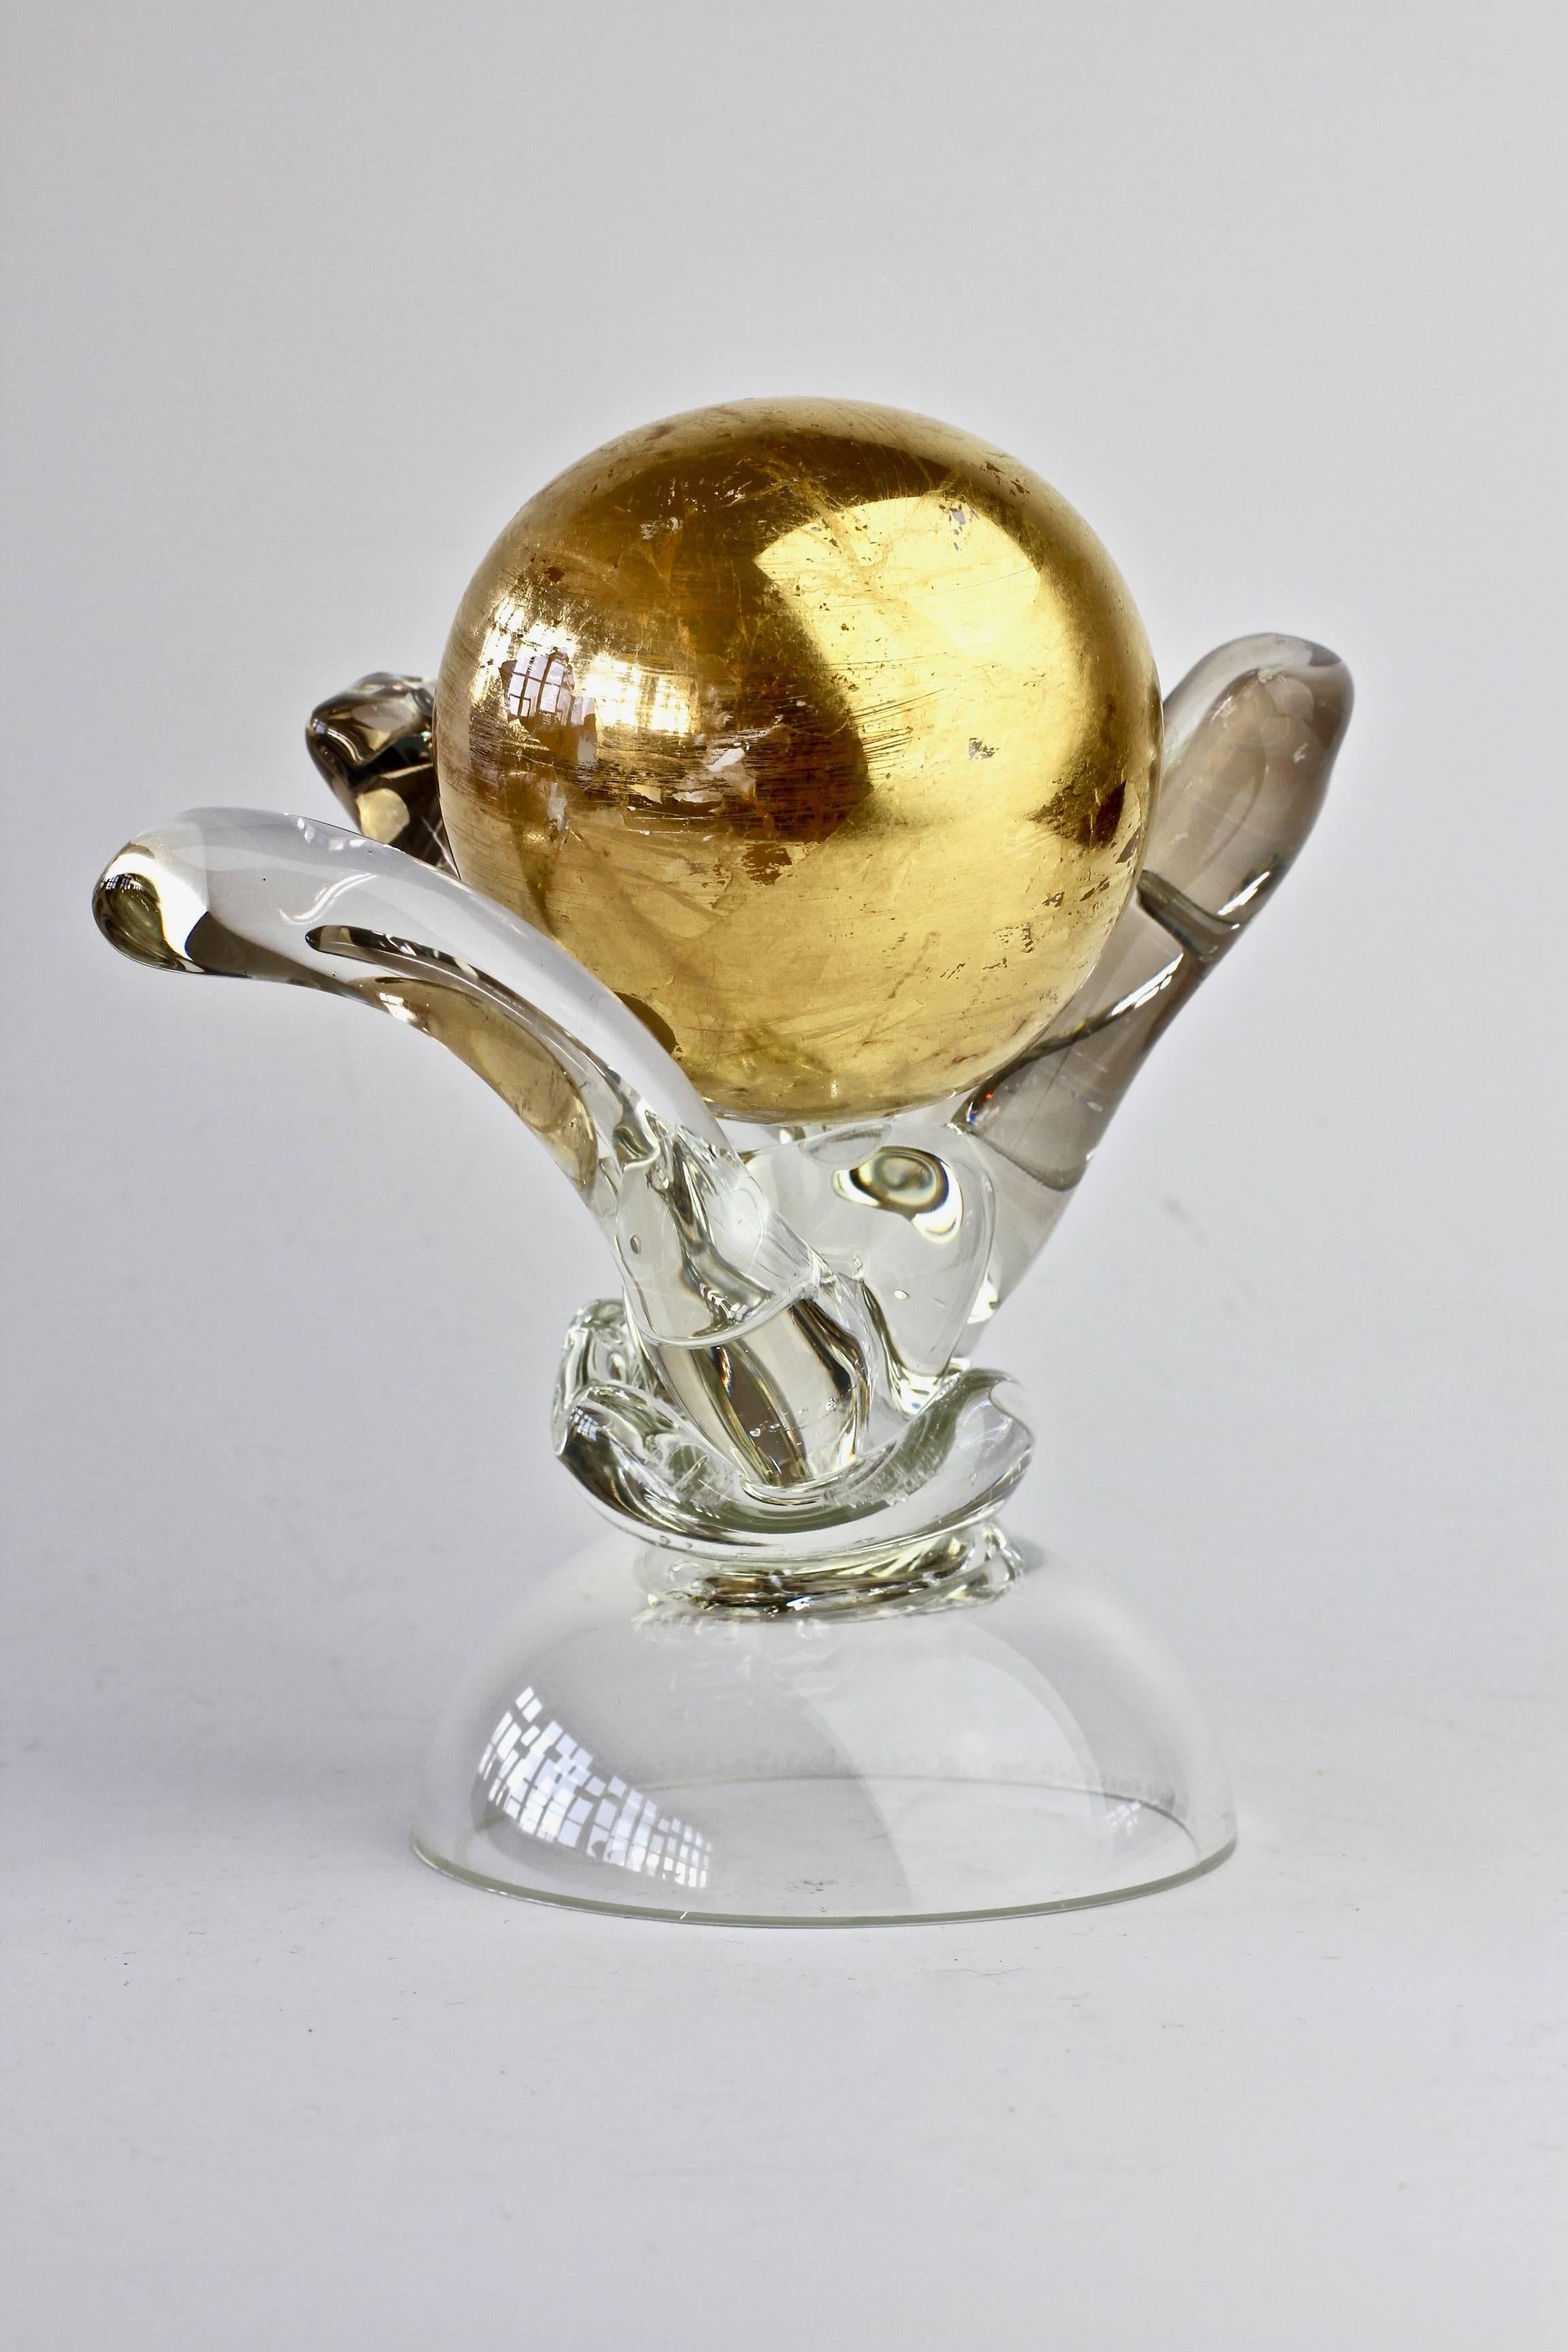 Unusual and quirky art glass sculpture signed by British glass artist and maker Adam Aaronson, England, 1997. Elegant and organically formed holding a 'golden globe' gilded glass ball. 

This was produced 1997 - in the middle of Adam Aaronson's